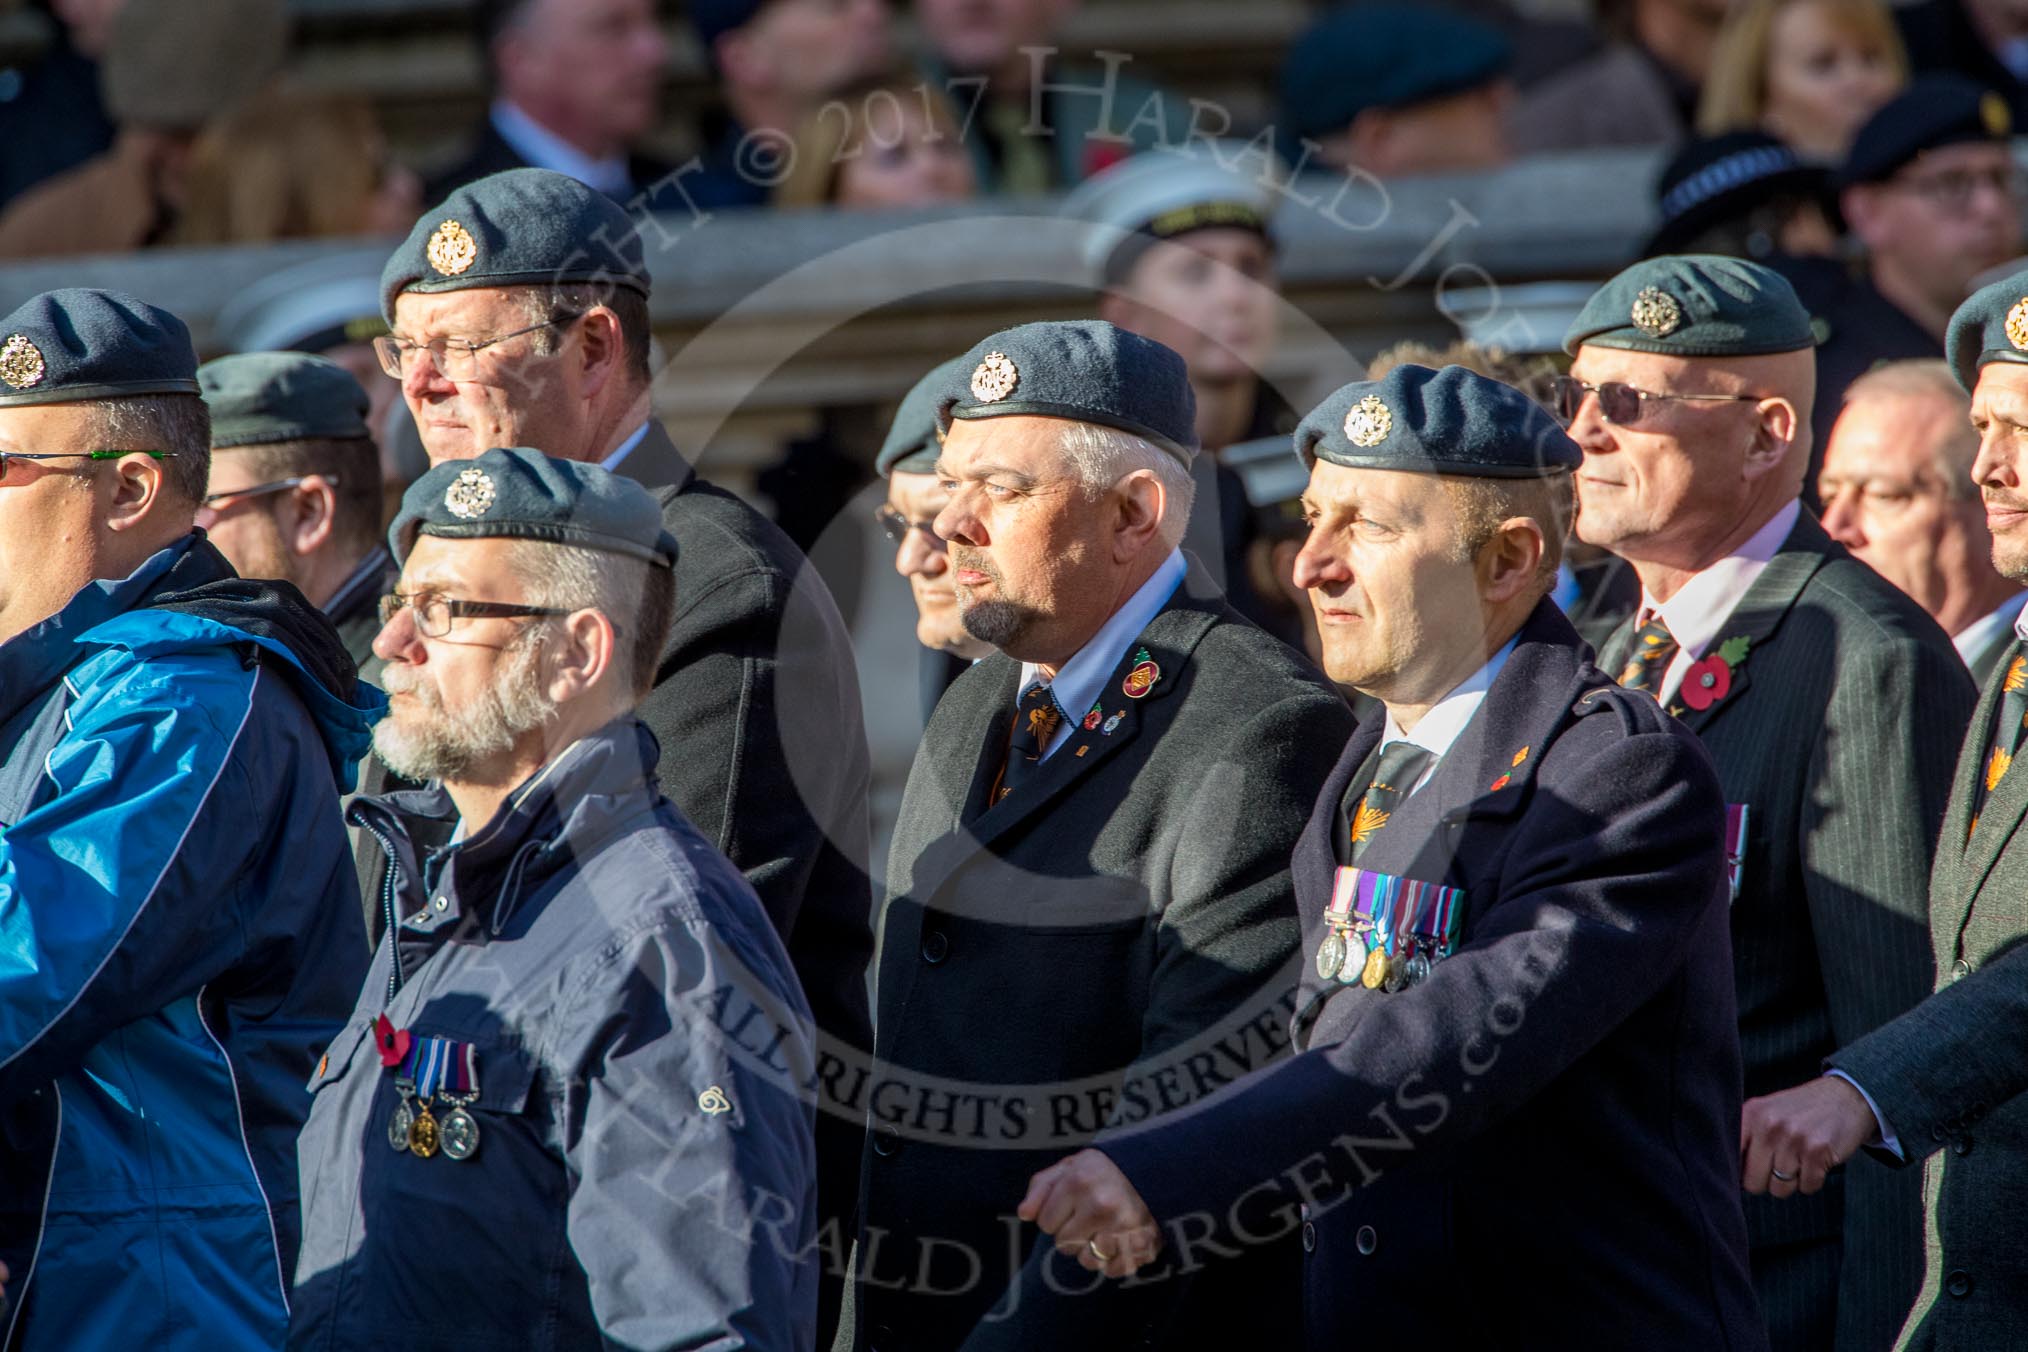 Royal Air Forces Association Armourers Branch (Group C26, 45 members) during the Royal British Legion March Past on Remembrance Sunday at the Cenotaph, Whitehall, Westminster, London, 11 November 2018, 12:18.